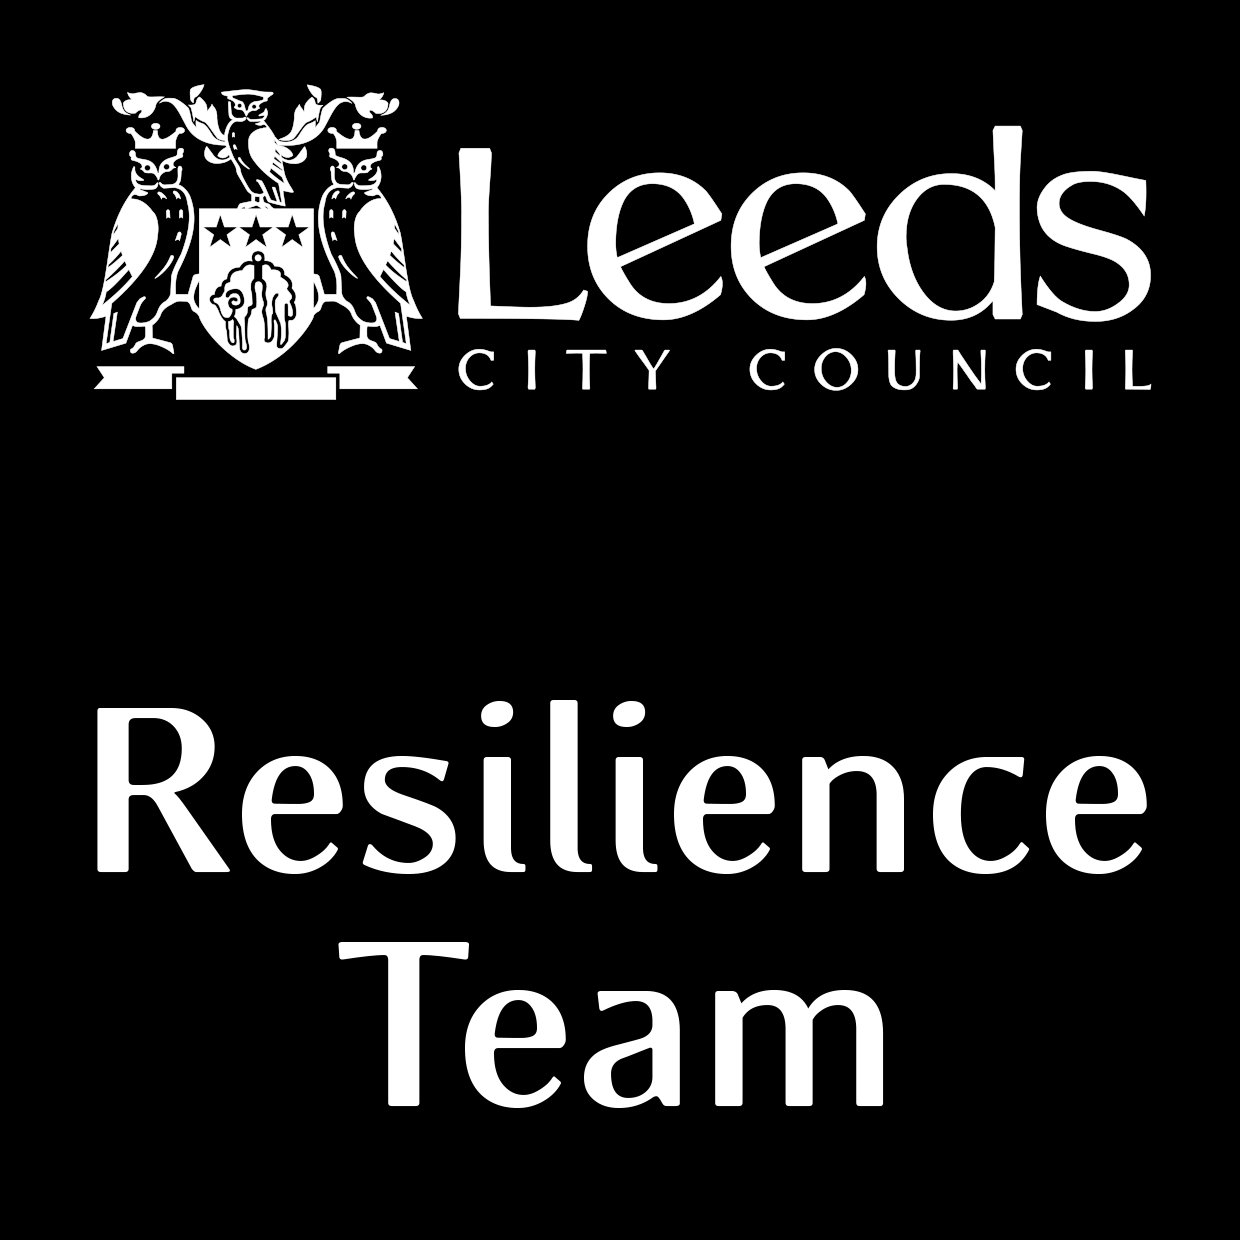 Official account Leeds City Council Resilience & Emergencies Team. Emergency info/updates, preparedness & community resilience. CCA 2004. Not monitored 24/7.